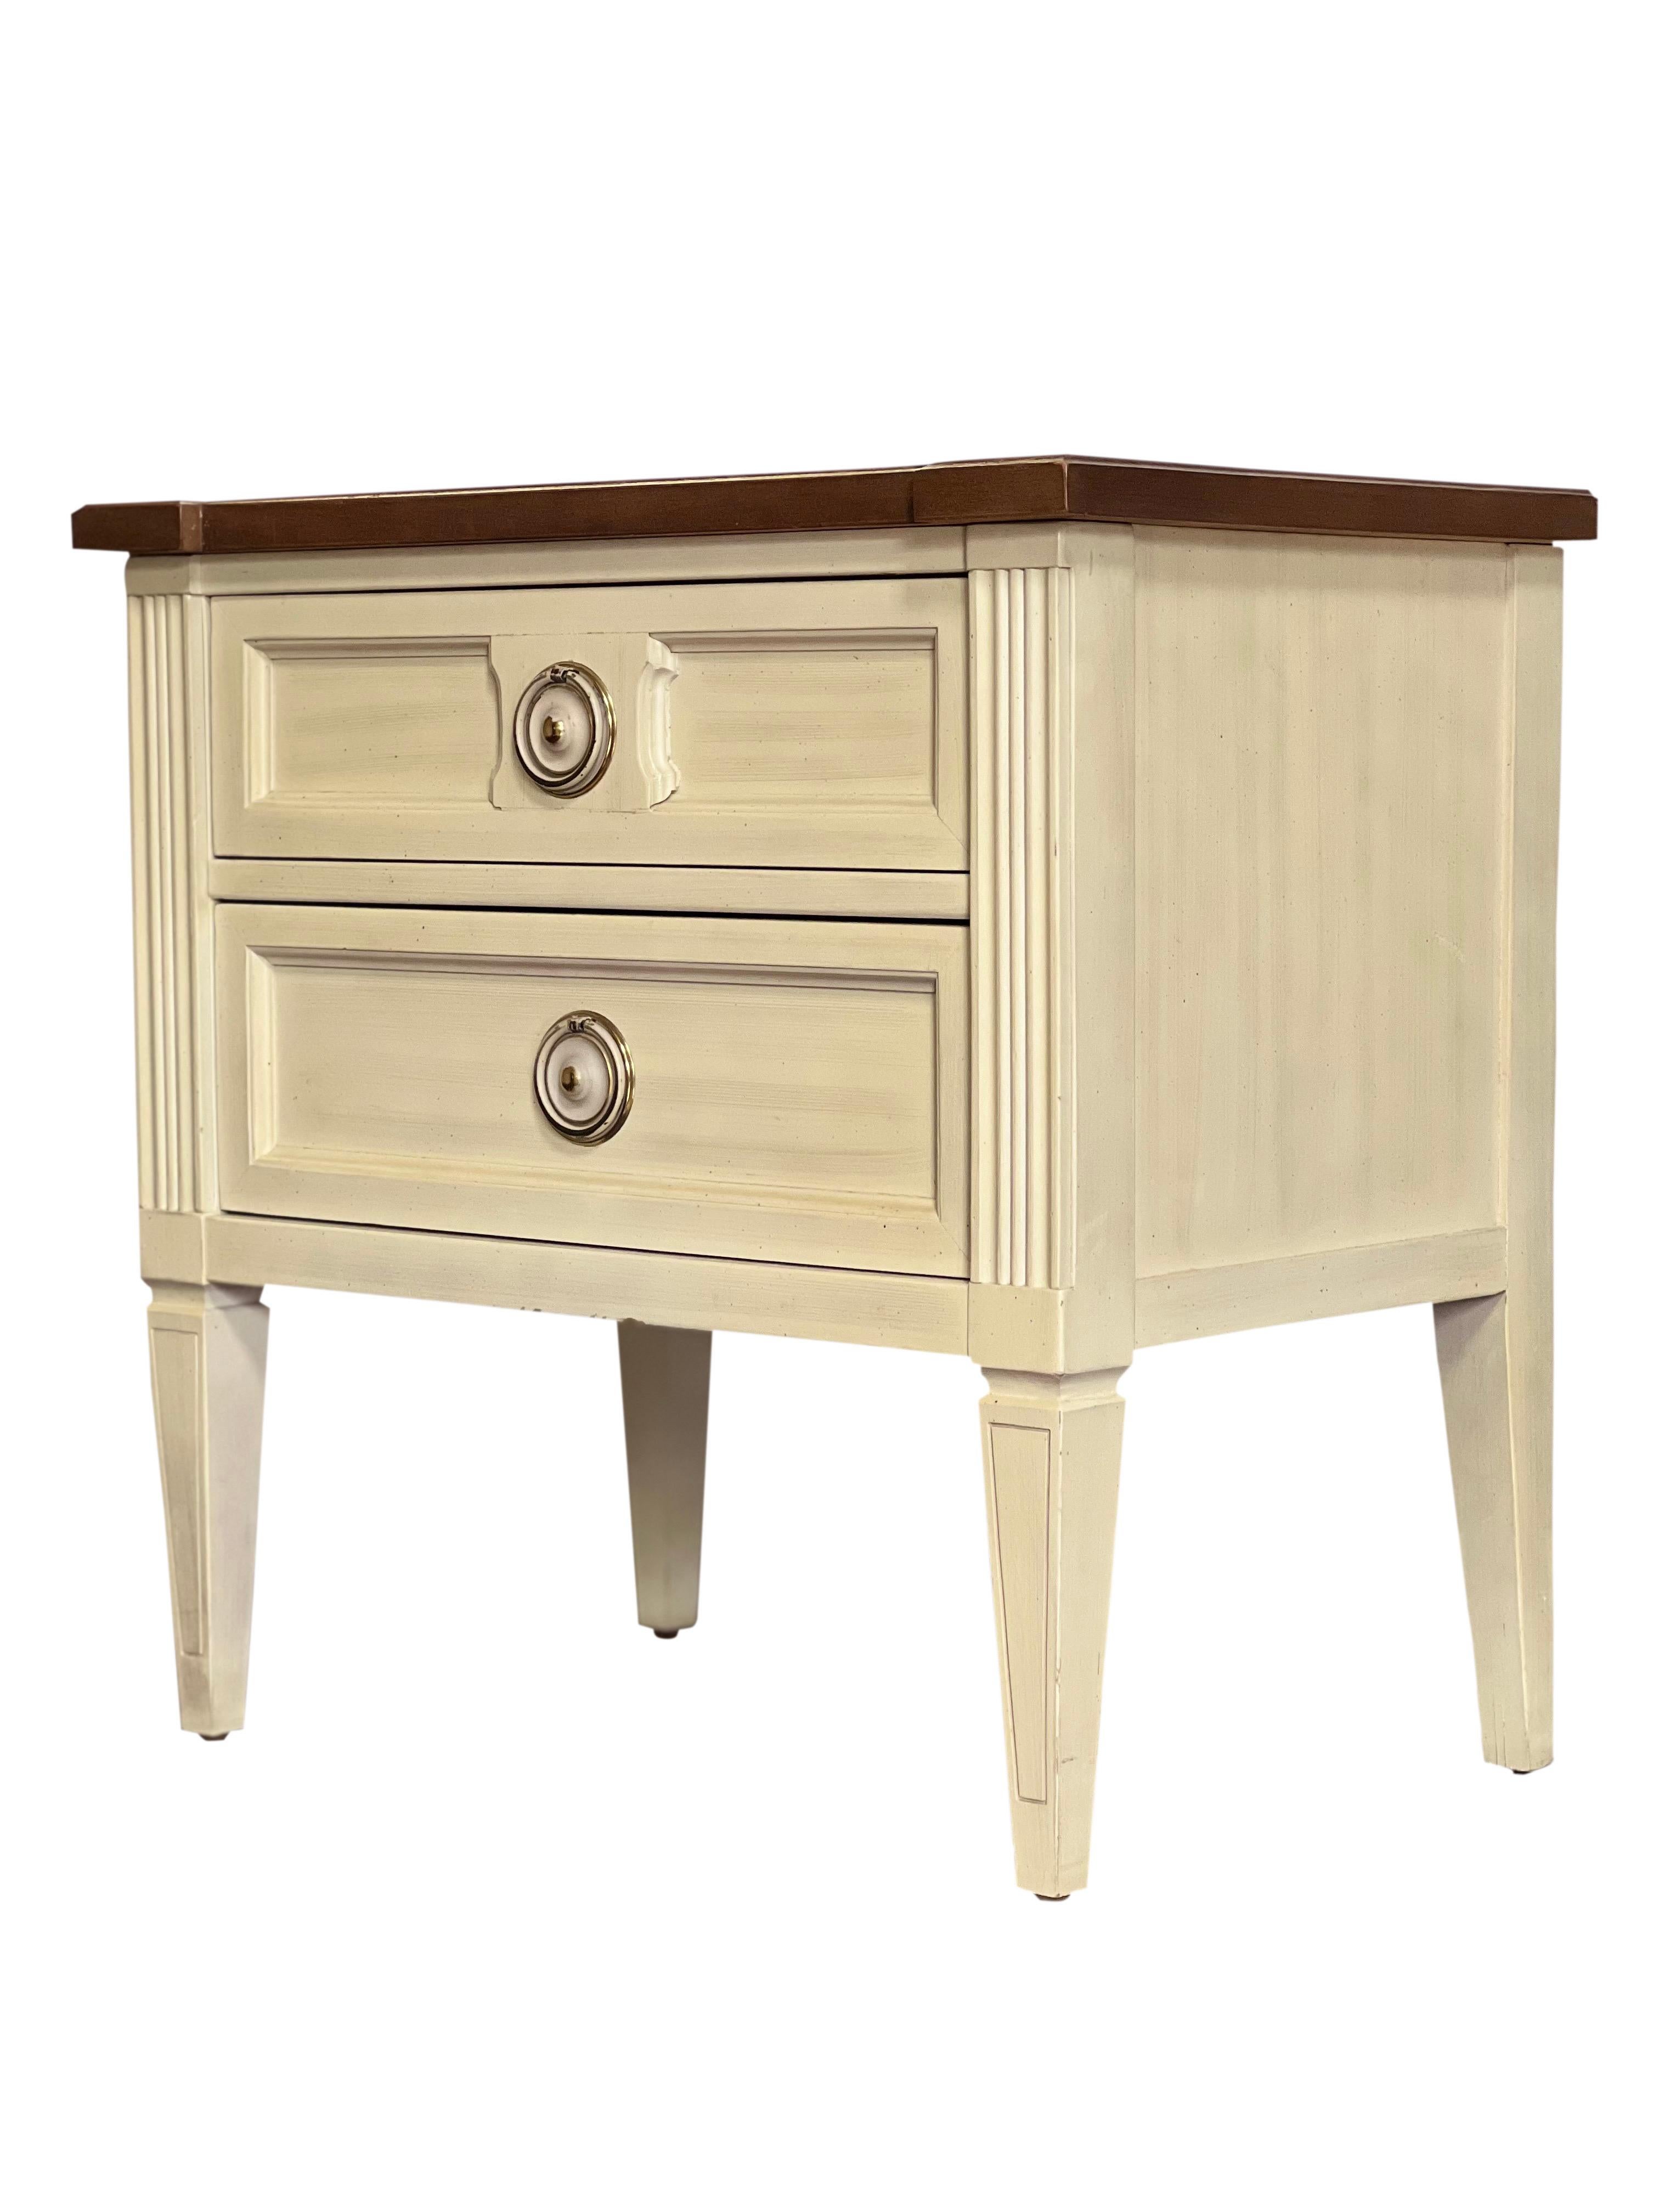 Brass American of Martinsville Parquet Top White Nightstands, a Pair For Sale